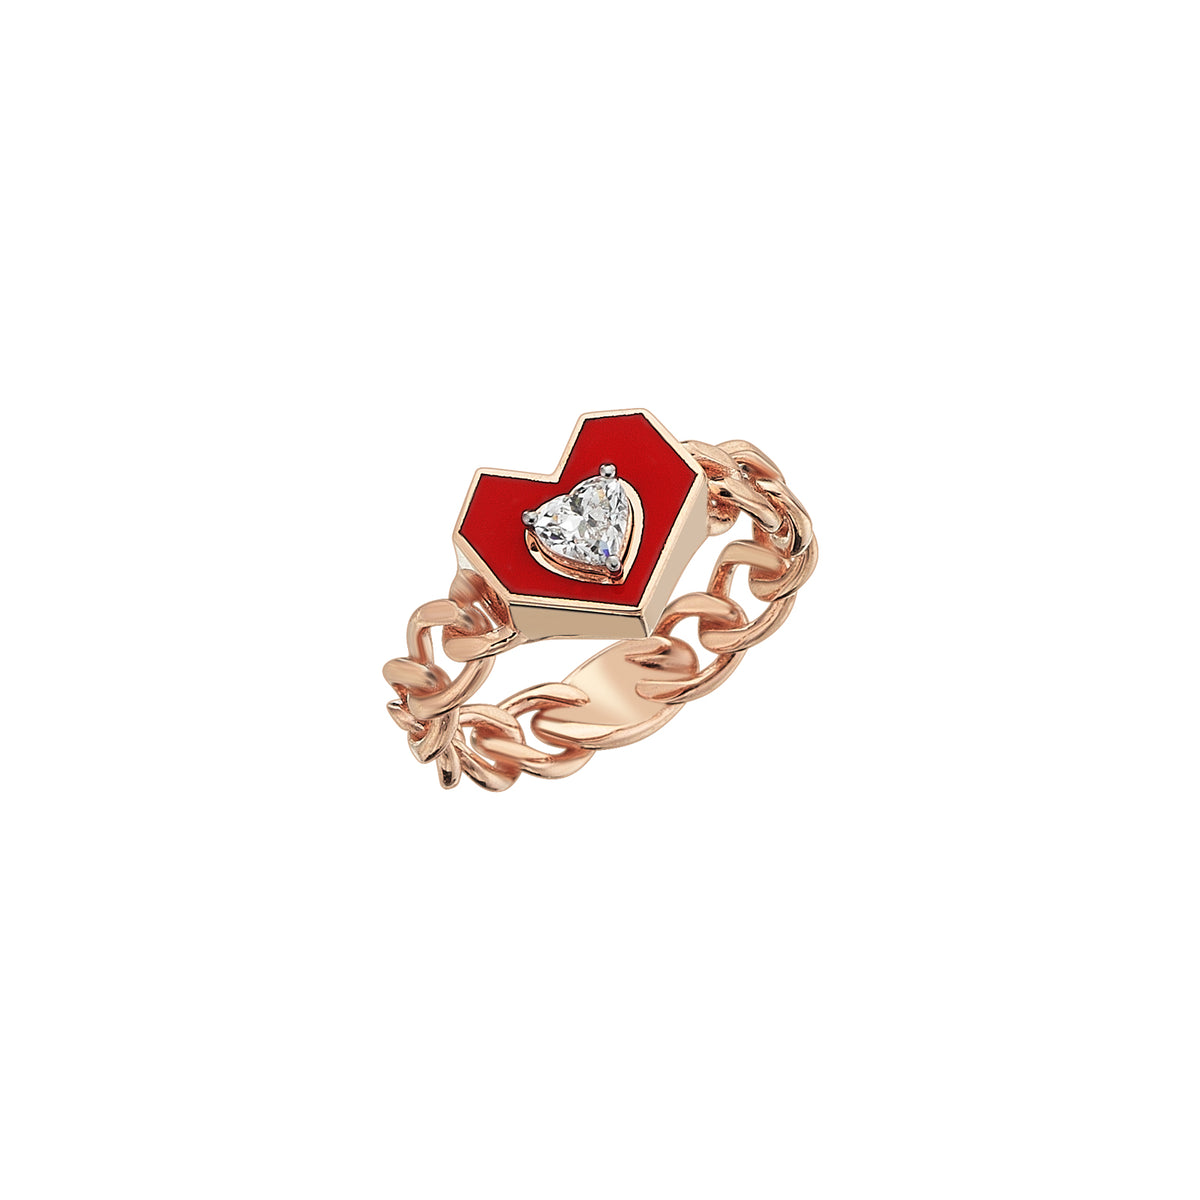 Cupid Ring Roslow Gold / Heart White Diamond and Red Ceramic / 5 (EU 49)